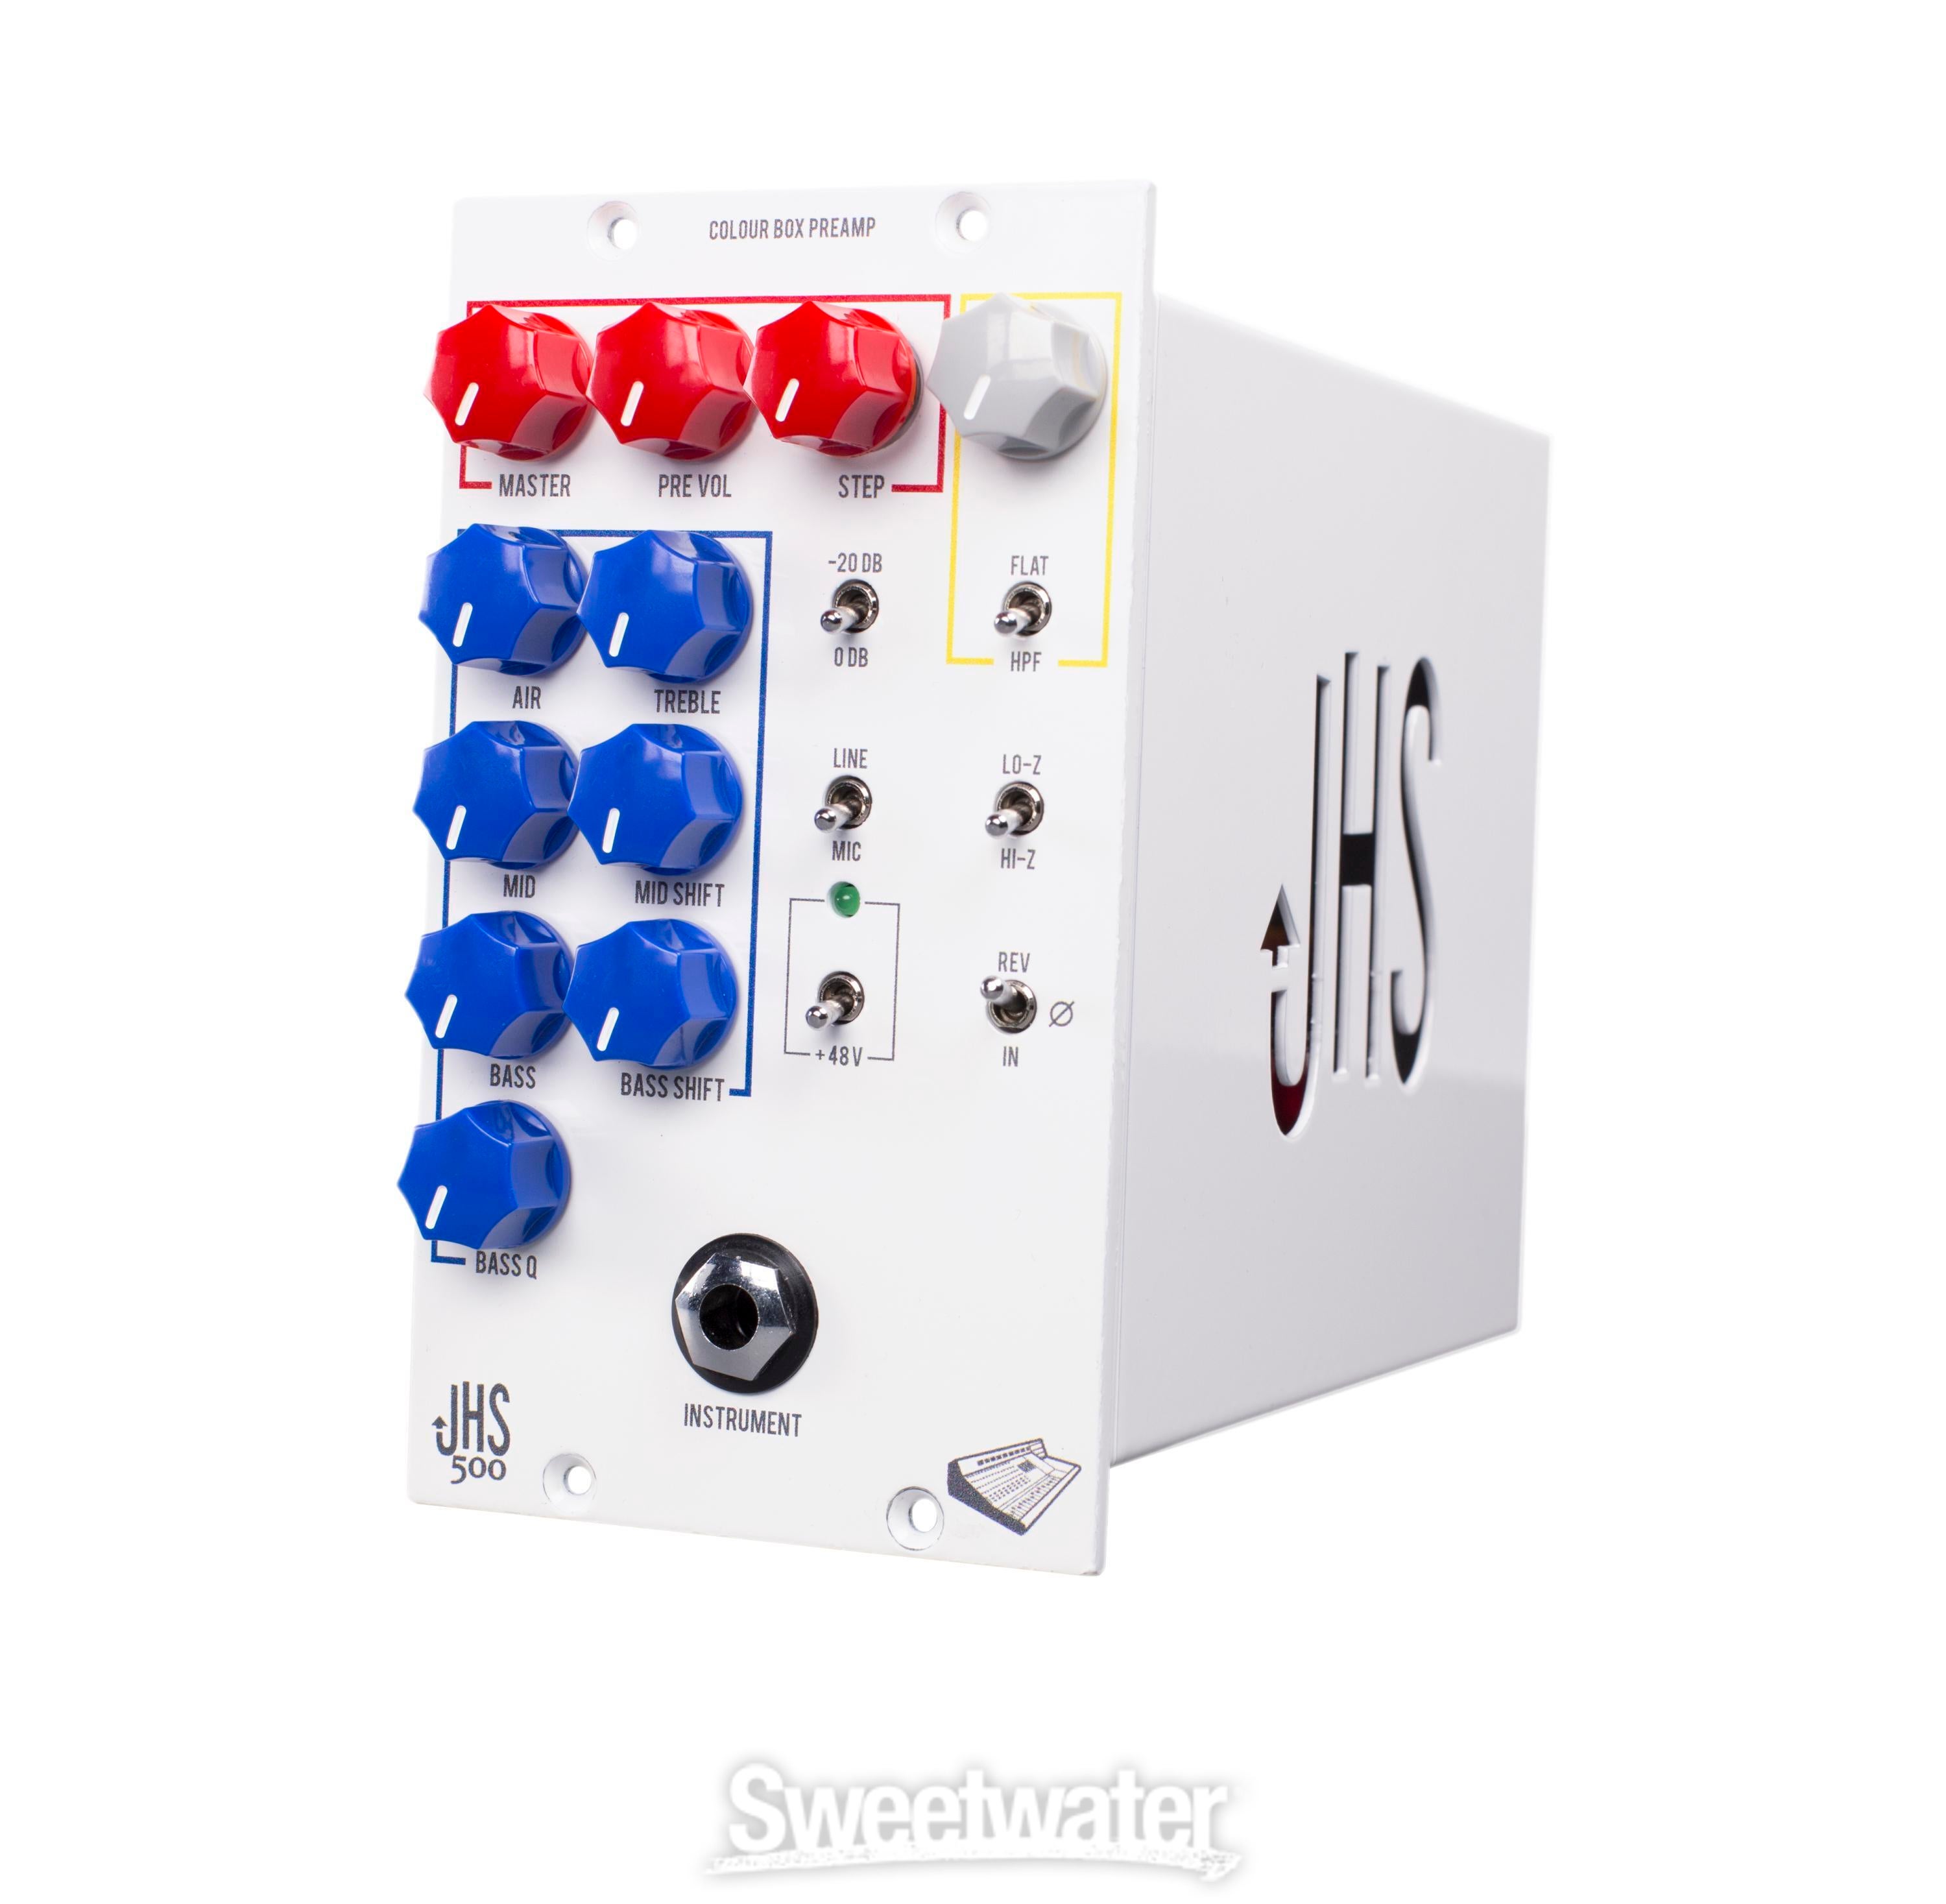 JHS Colour Box 500 Microphone Preamp & EQ | Sweetwater